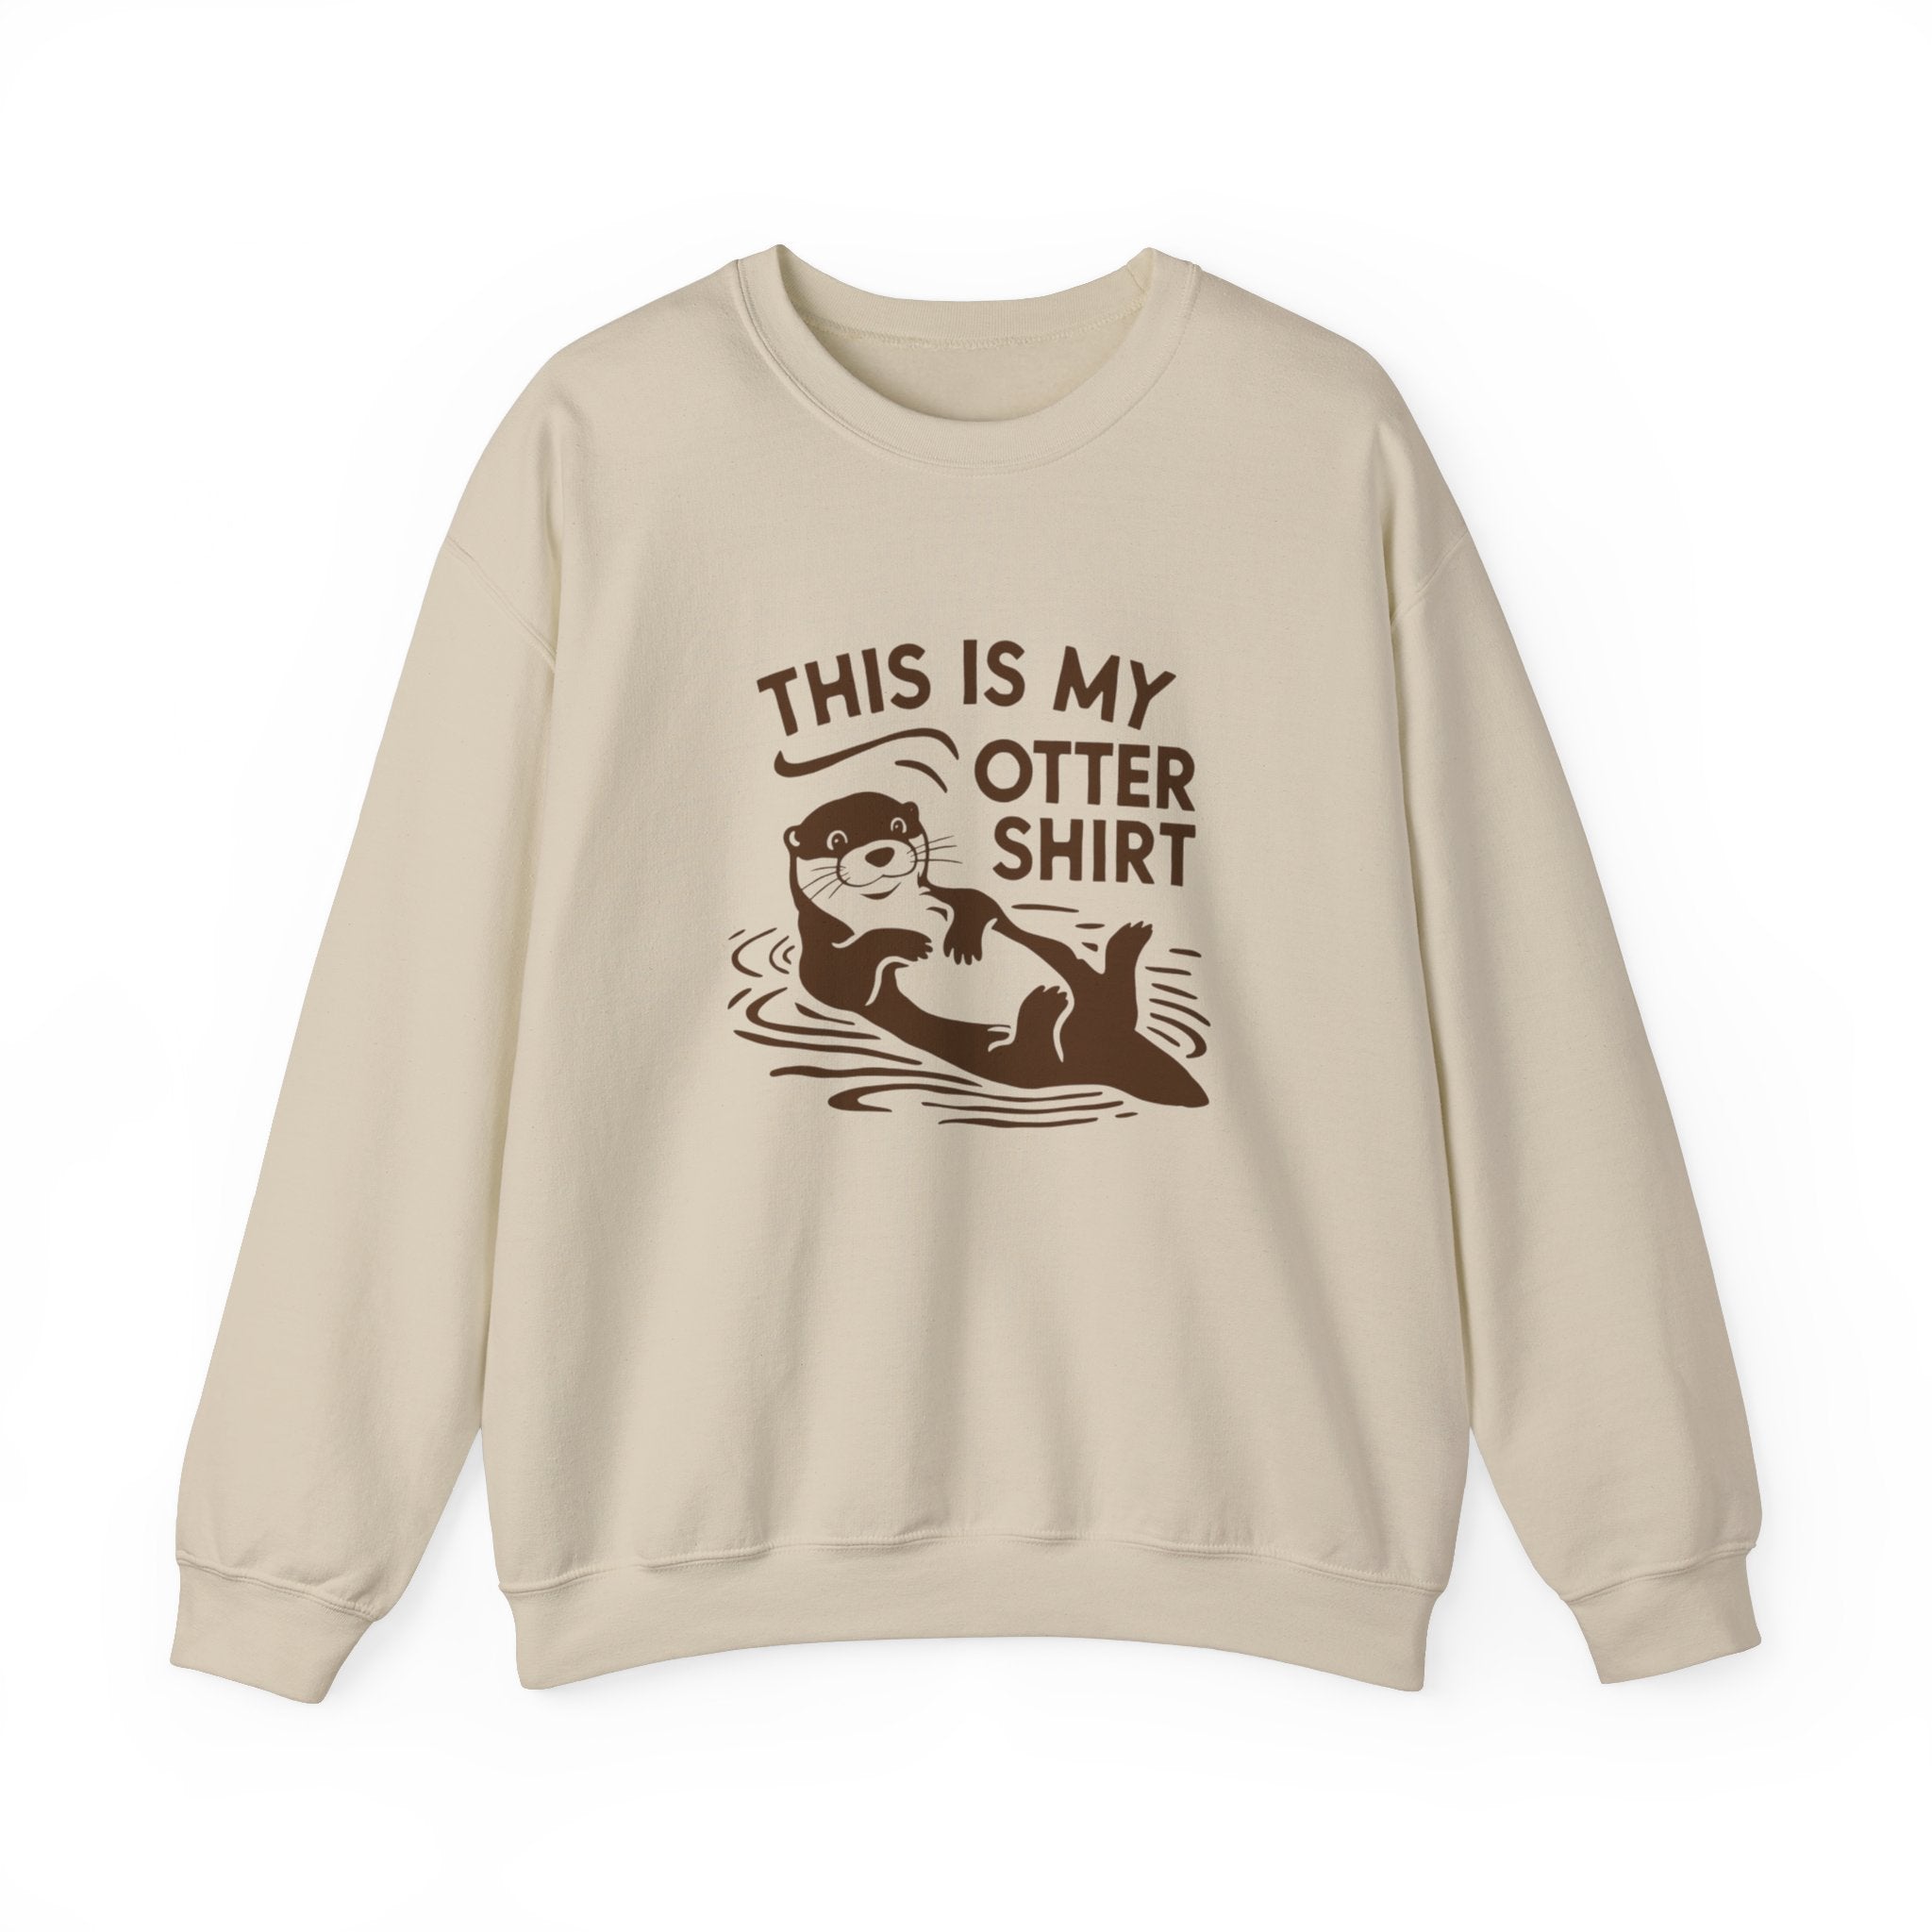 A cozy beige sweatshirt perfect for chilly seasons, featuring an illustration of an otter and the text "My Otter Shirt - Sweatshirt.